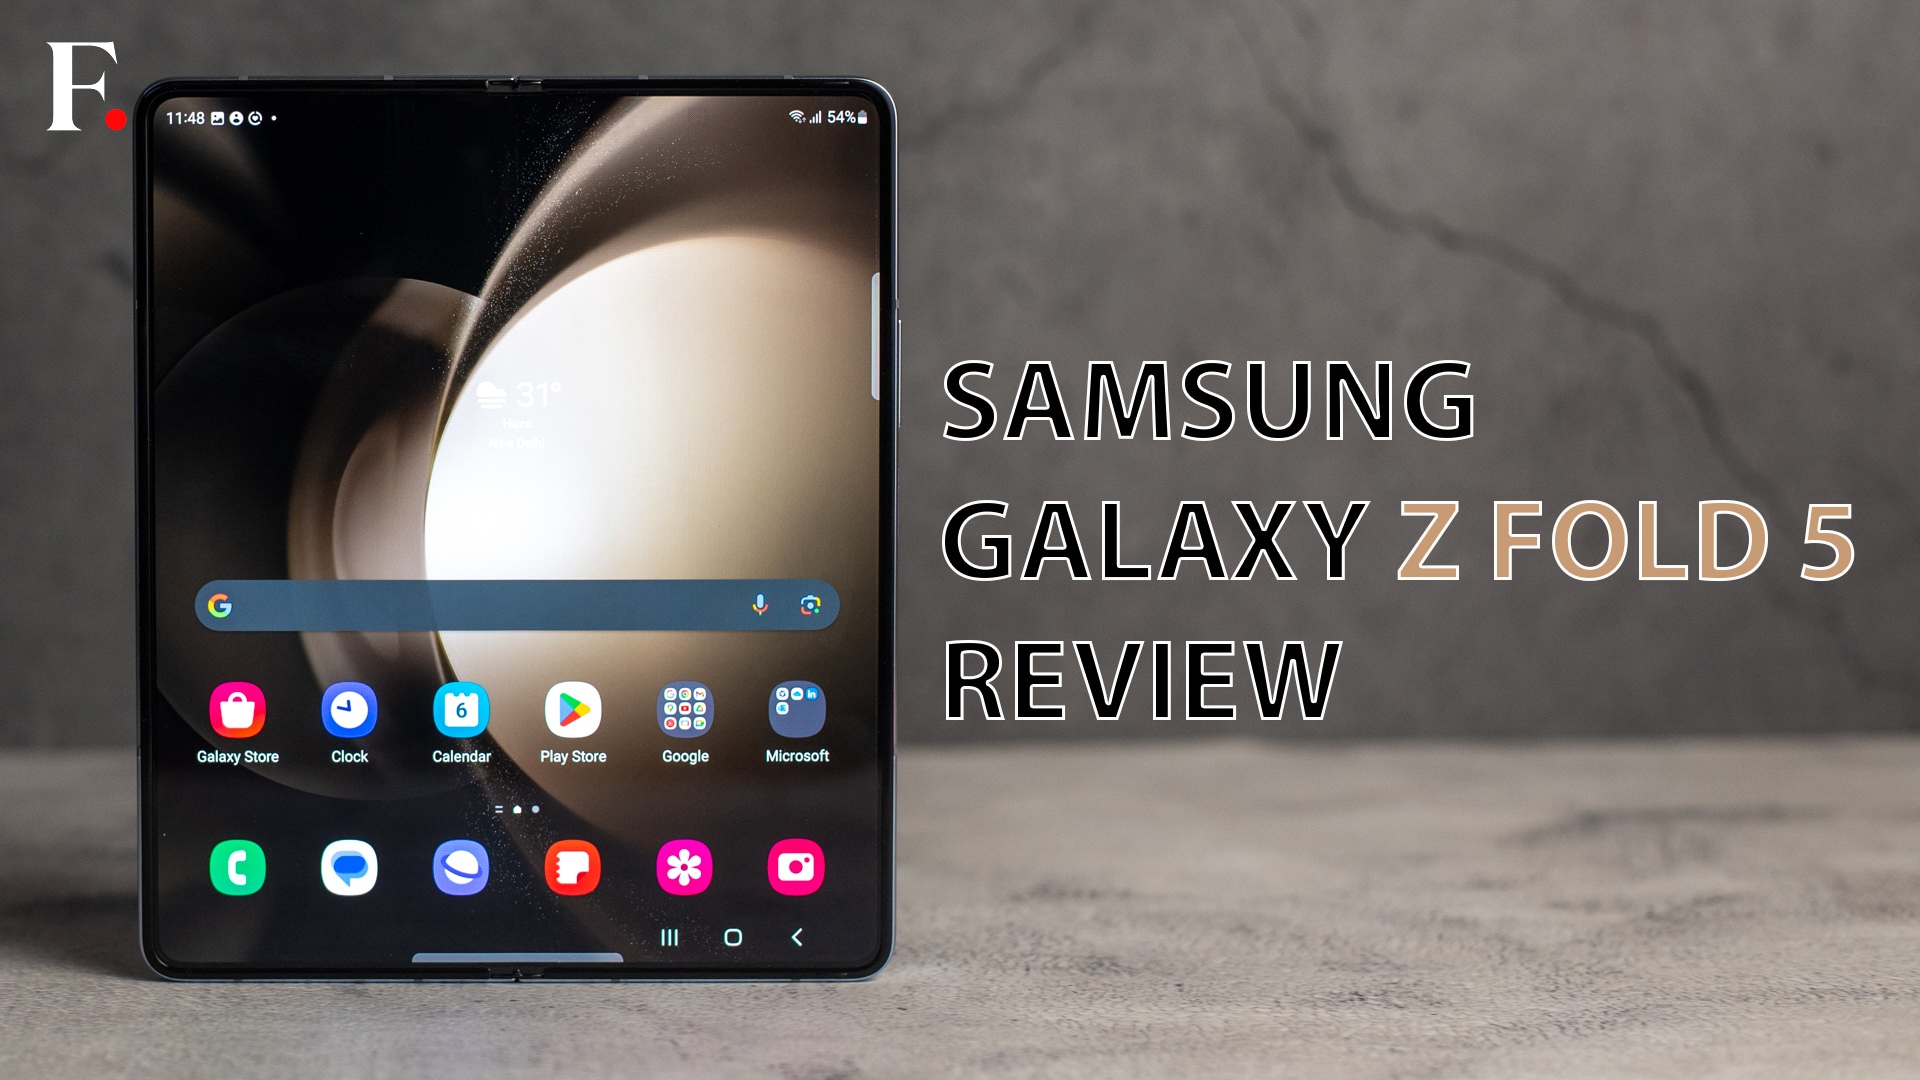 Samsung Galaxy Z Fold 5 Review: Incremental upgrades to an already